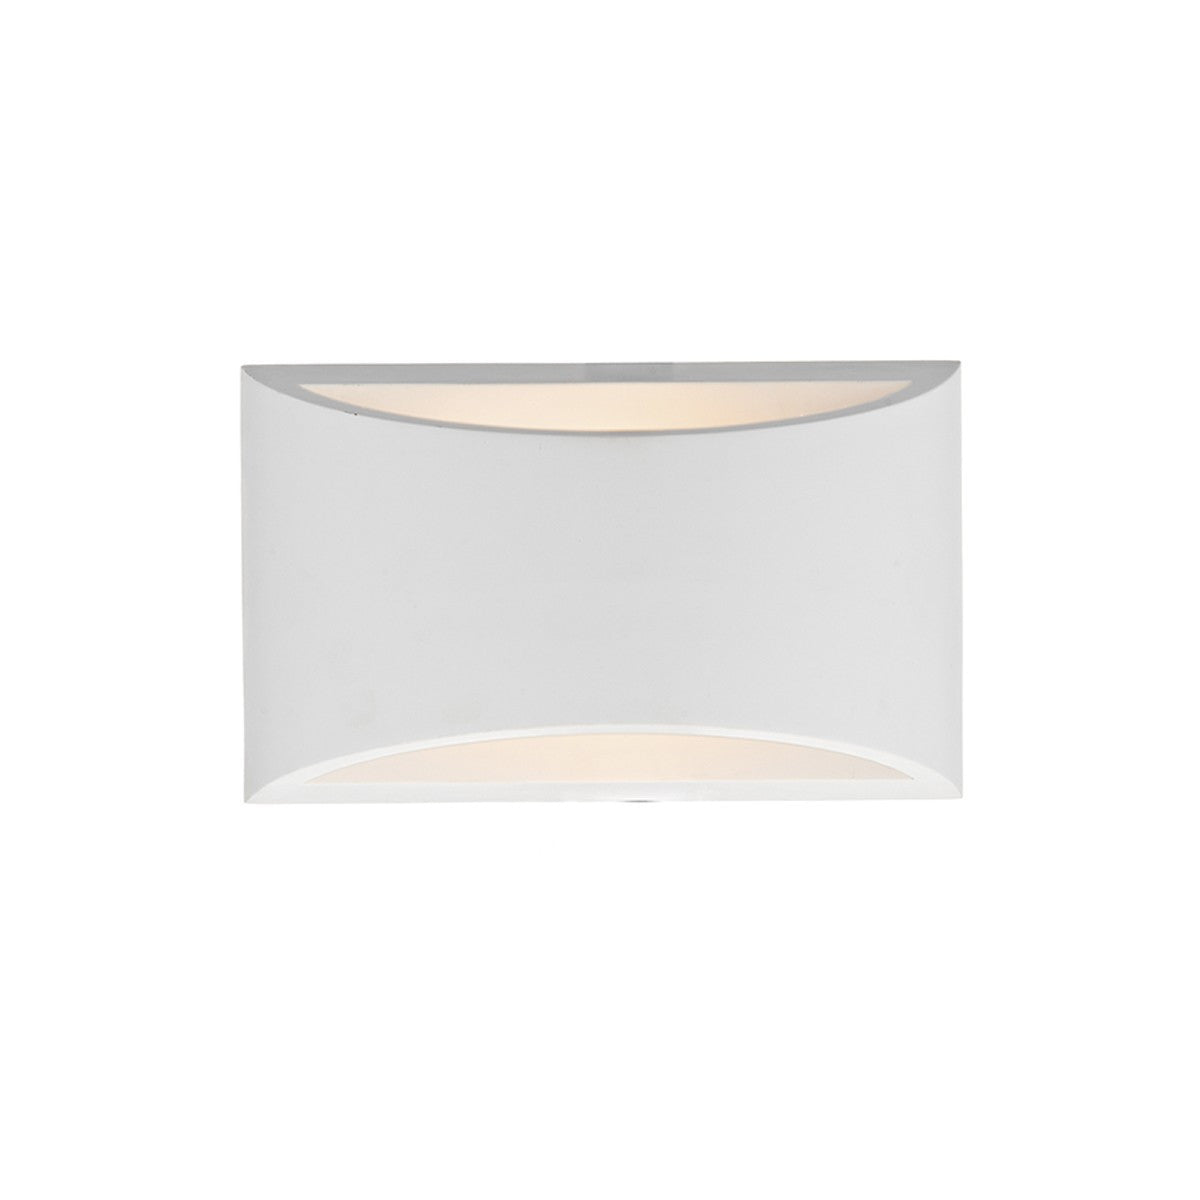 Hove White Small Wall Washer - London Lighting - 1